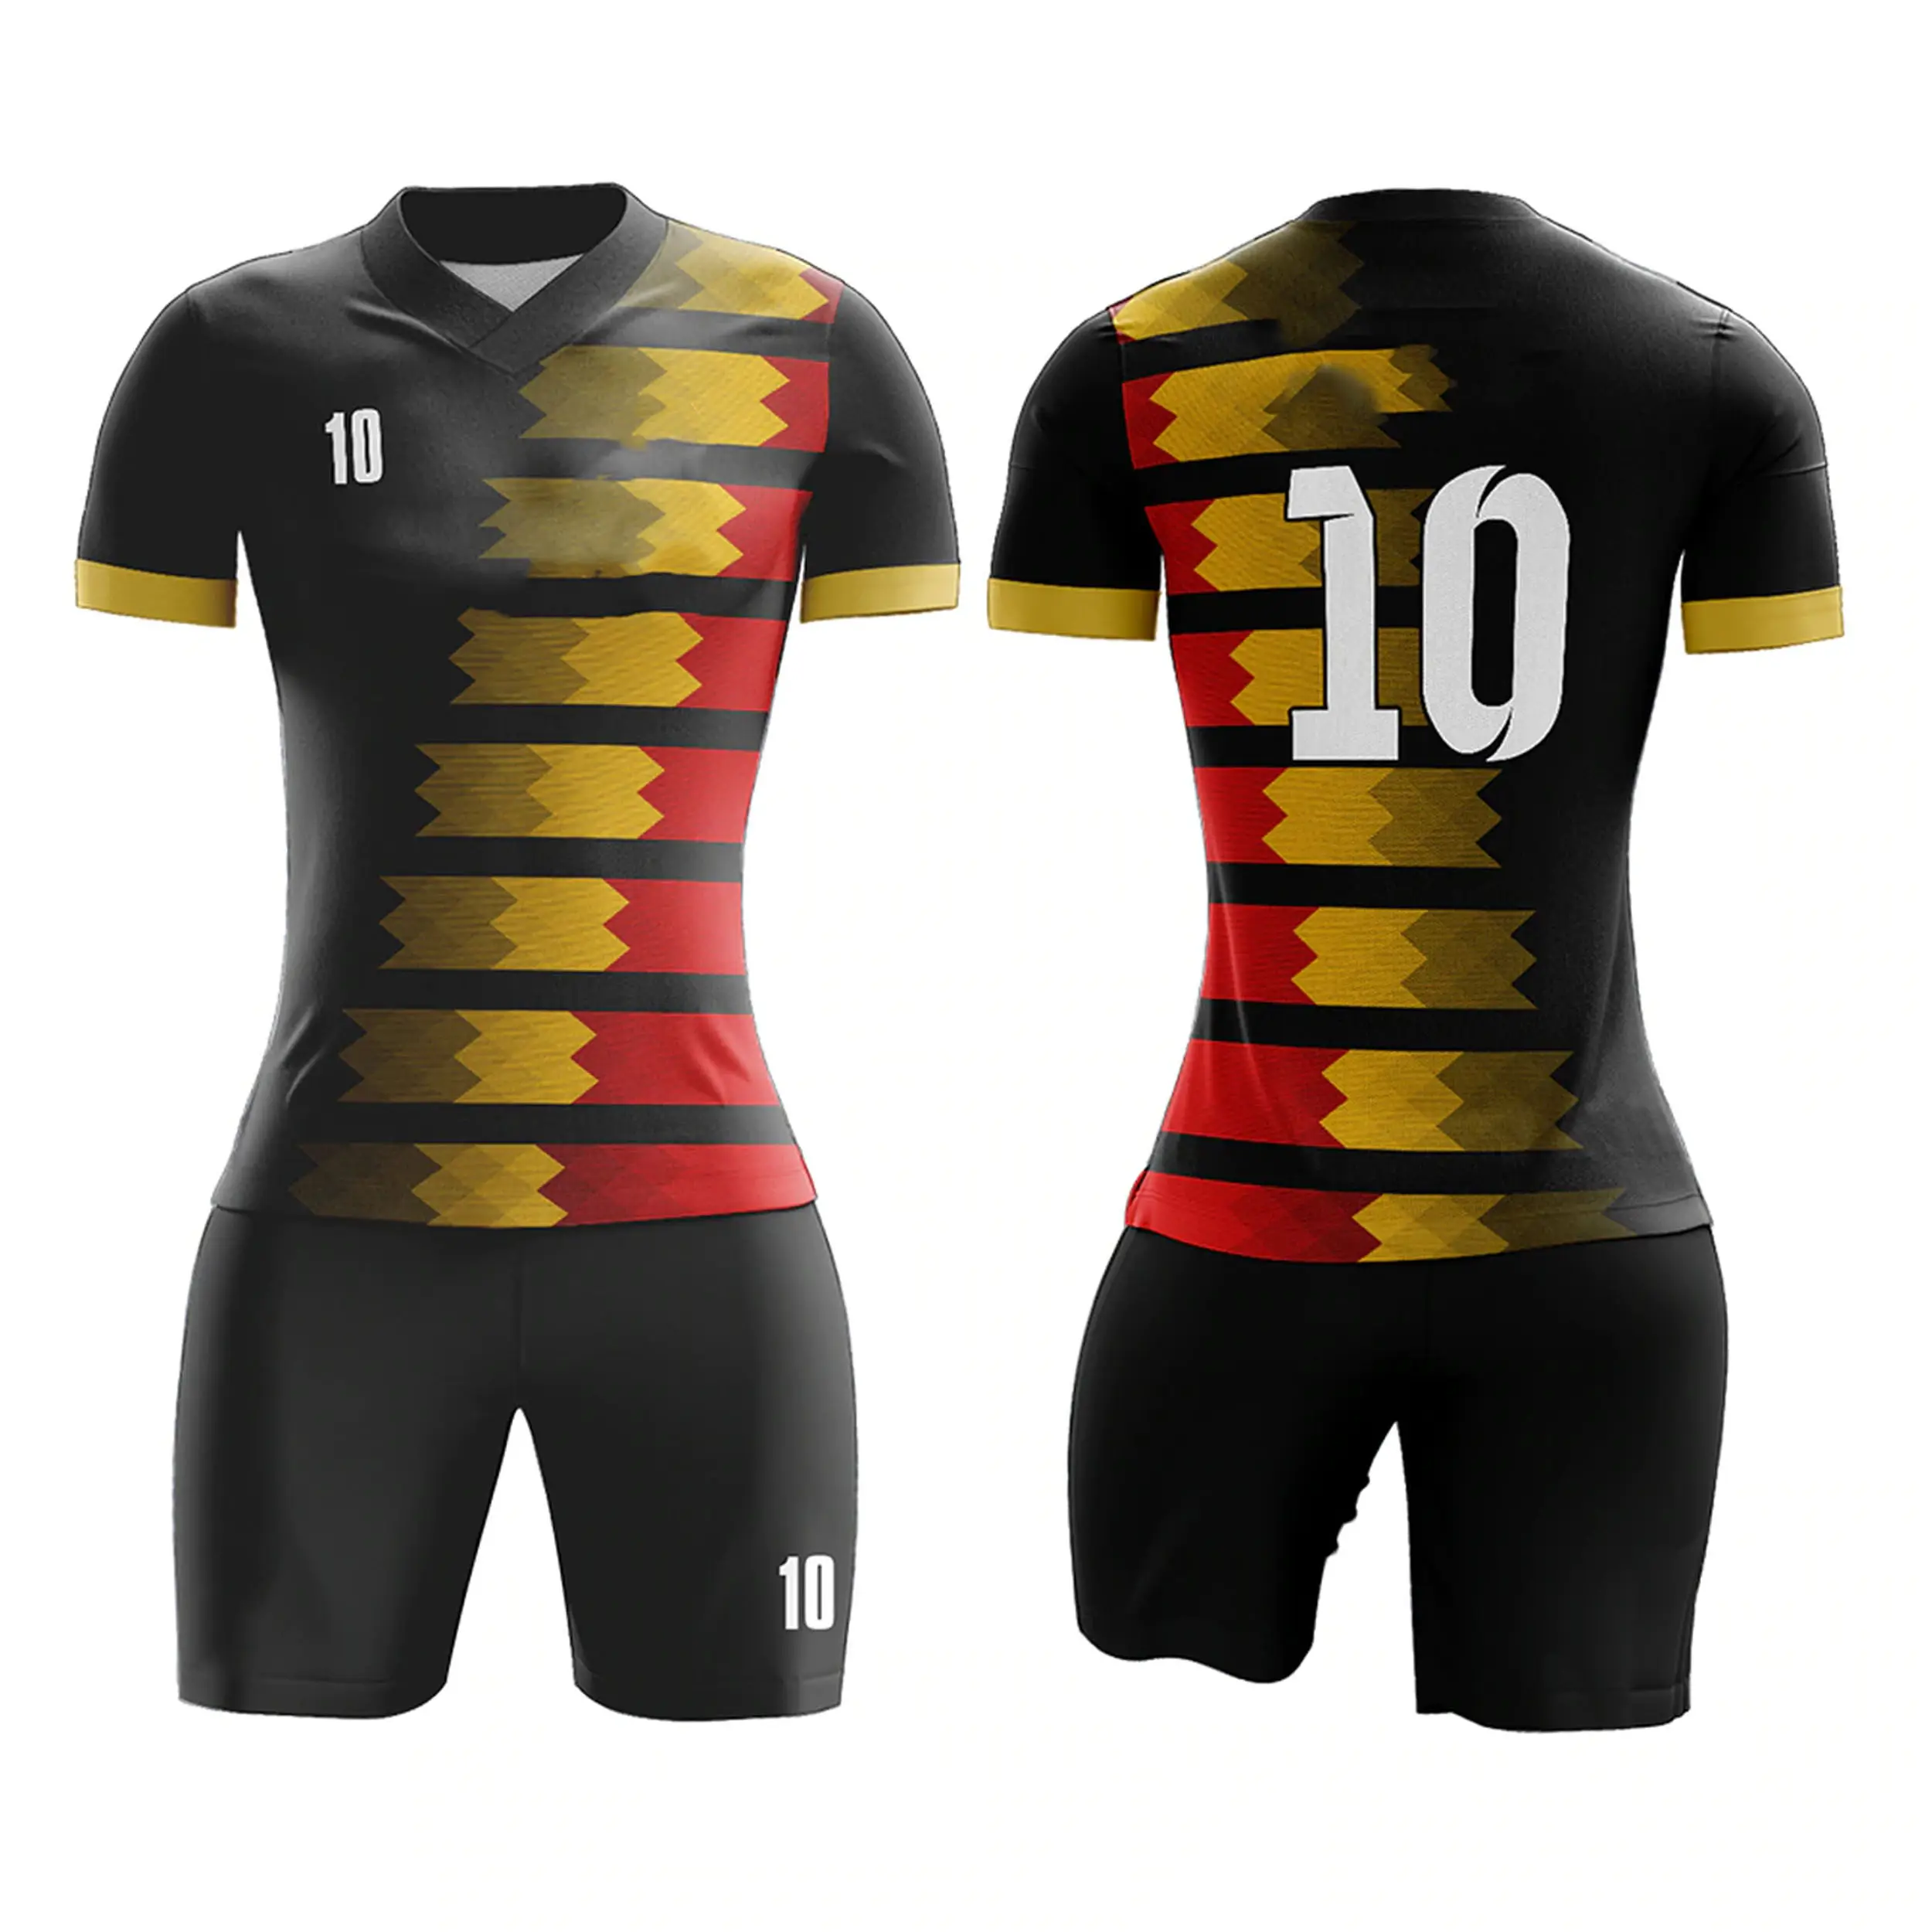 Top Quality Custom Unisex Design Full Kits Shirts And Shorts For Women Wholesale Sublimation Soccer Jerseys